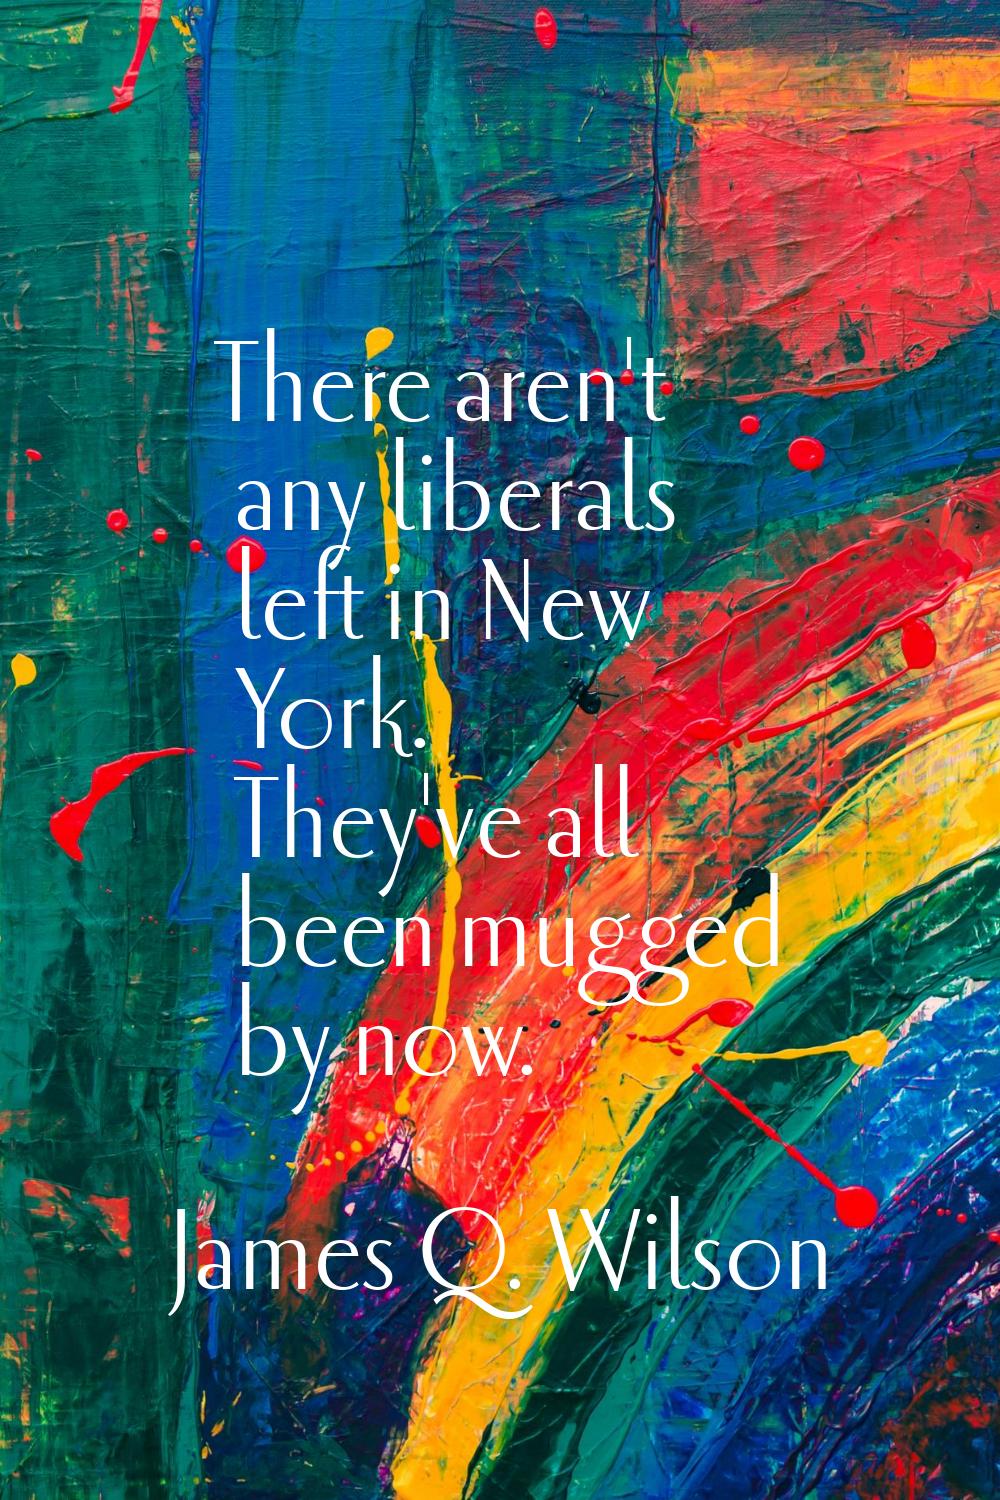 There aren't any liberals left in New York. They've all been mugged by now.